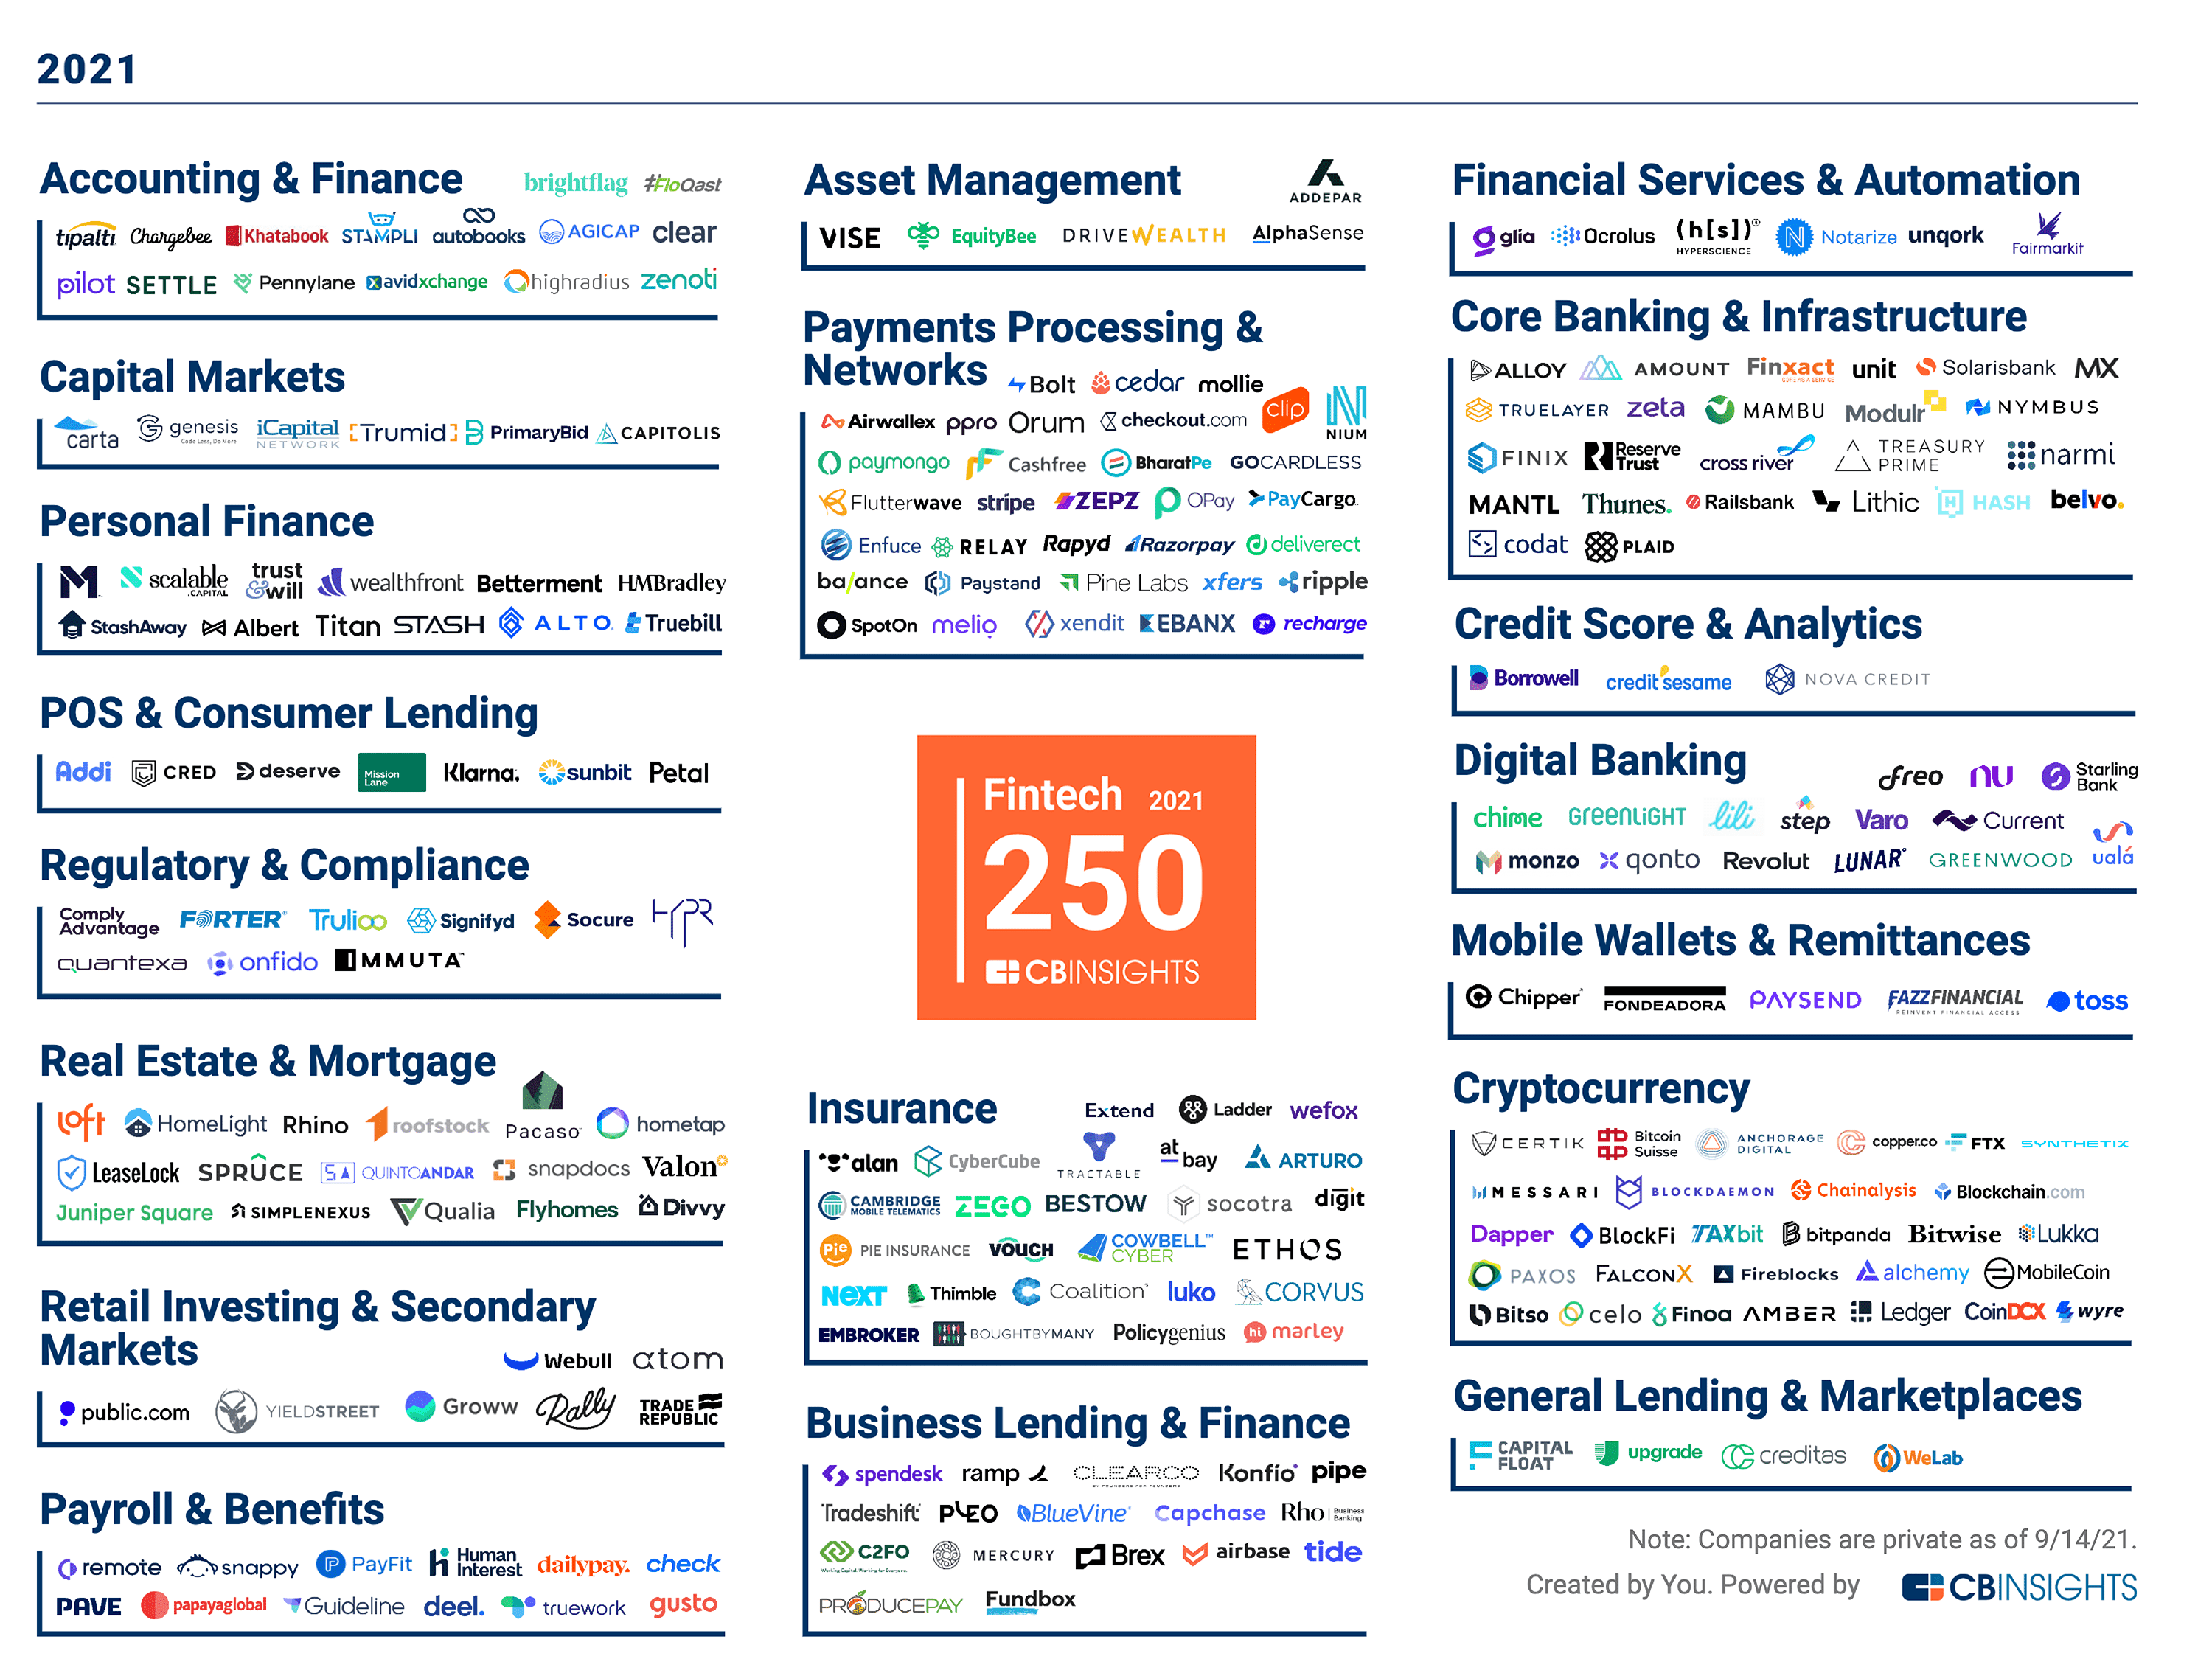 DriveWealth Named to the 2021 CB Insights Fintech 250 List of Top Fintech Startups